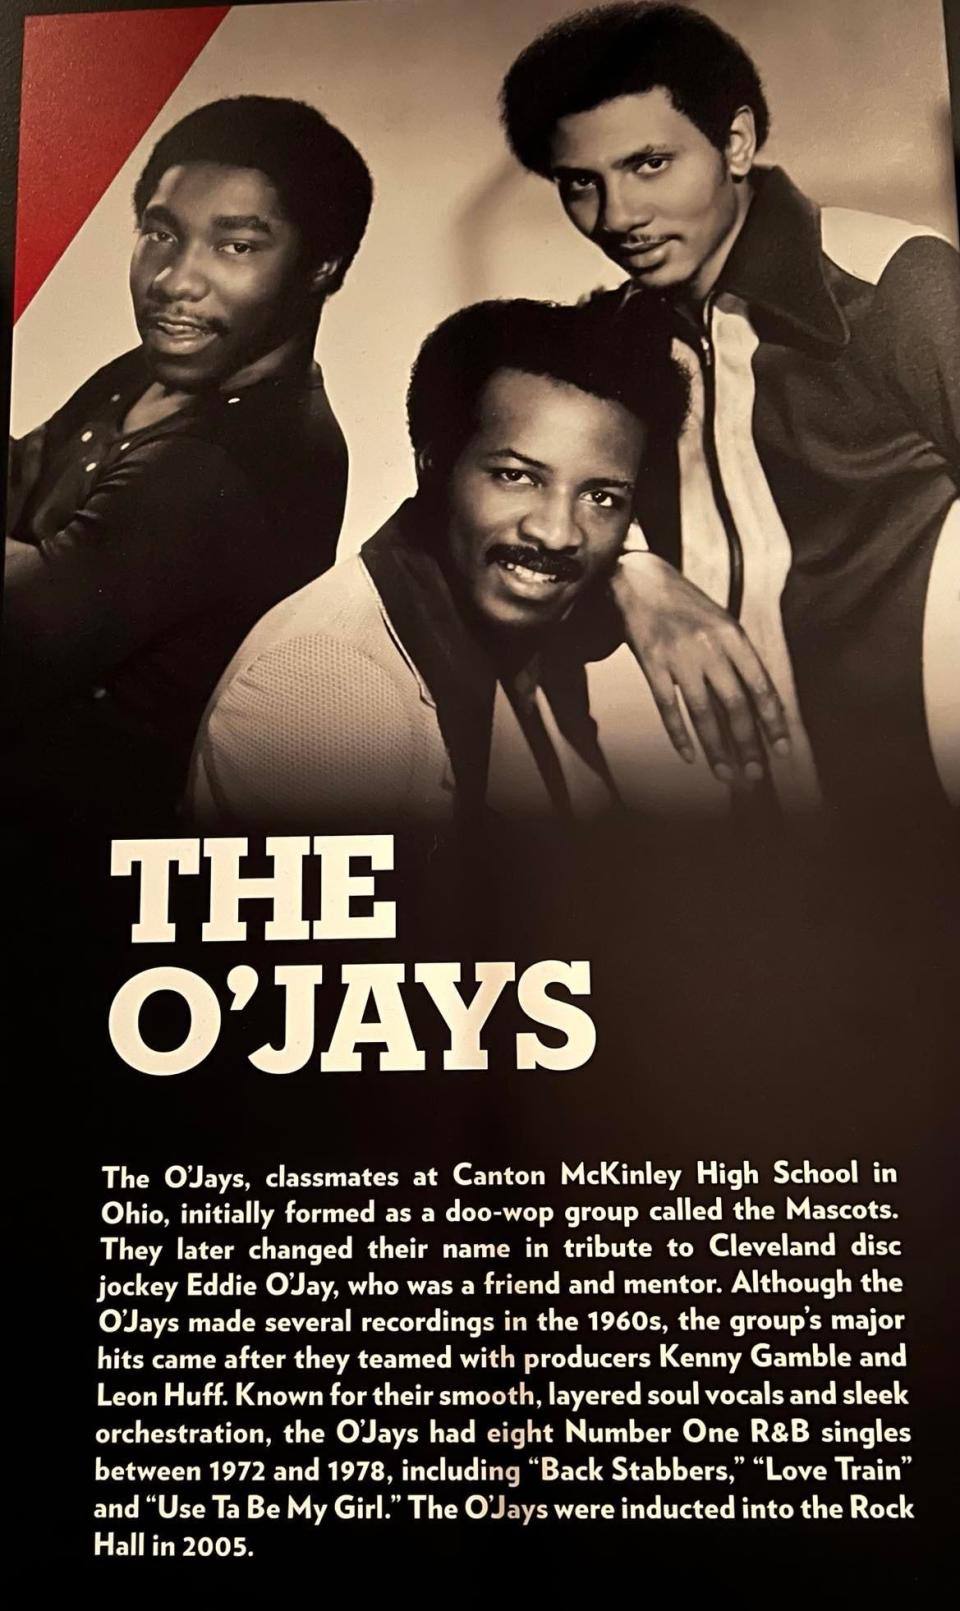 A display at the Rock and Roll Hall of Fame in Cleveland tells of how The O'Jays began as singers in Canton. The group gained popularity nationally in the 1970s, and was inducted into the rock hall in 2005.